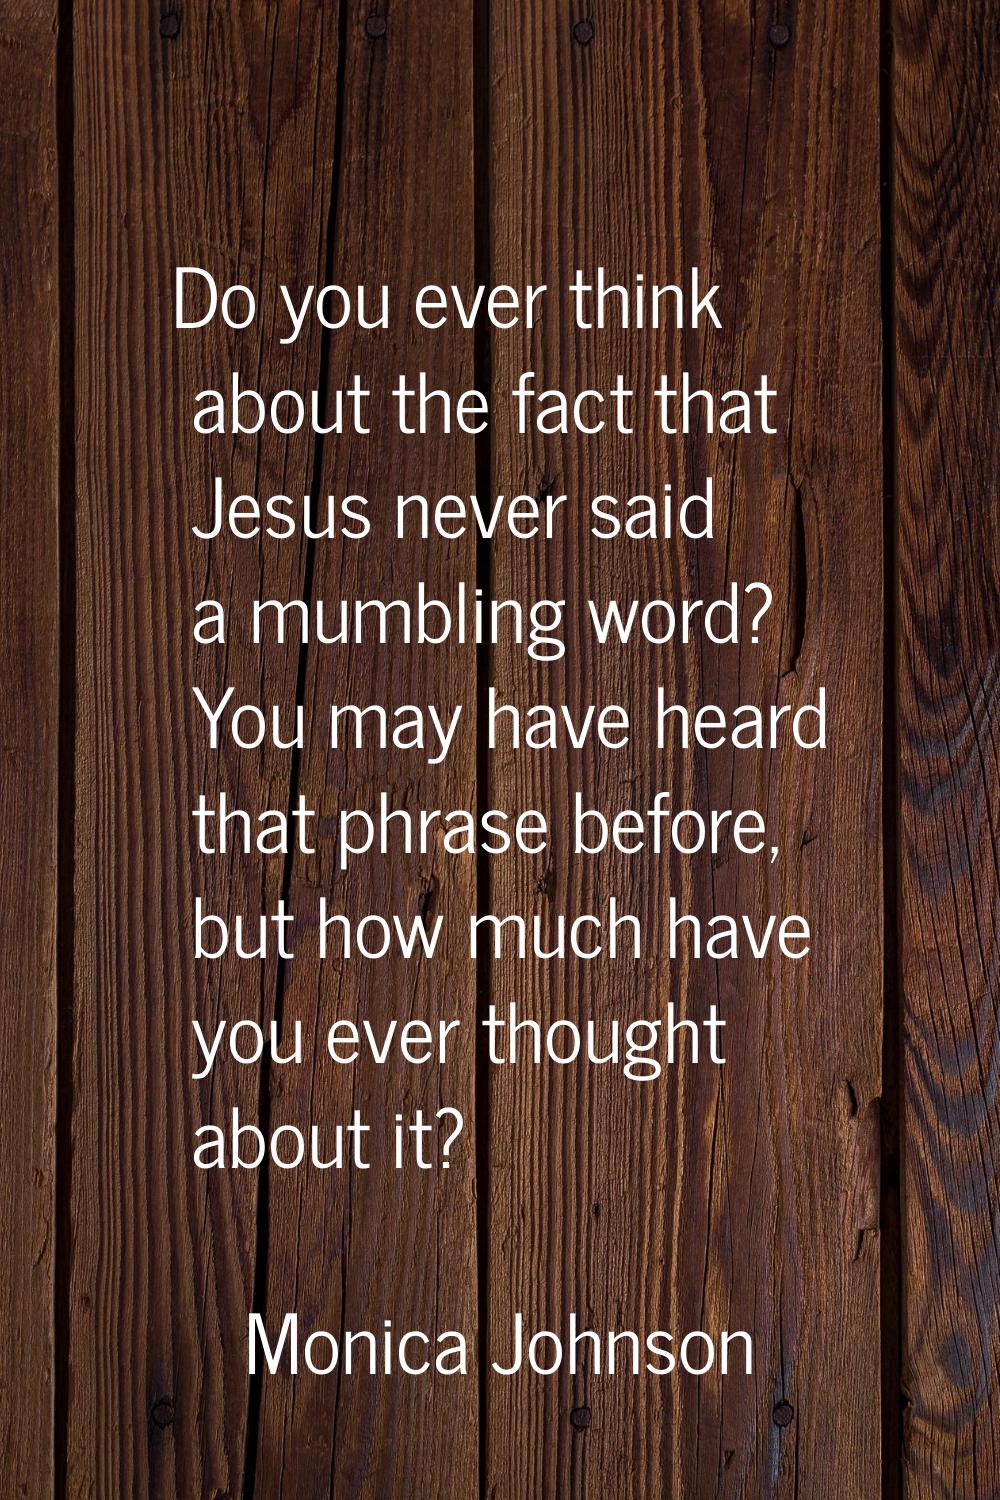 Do you ever think about the fact that Jesus never said a mumbling word? You may have heard that phr